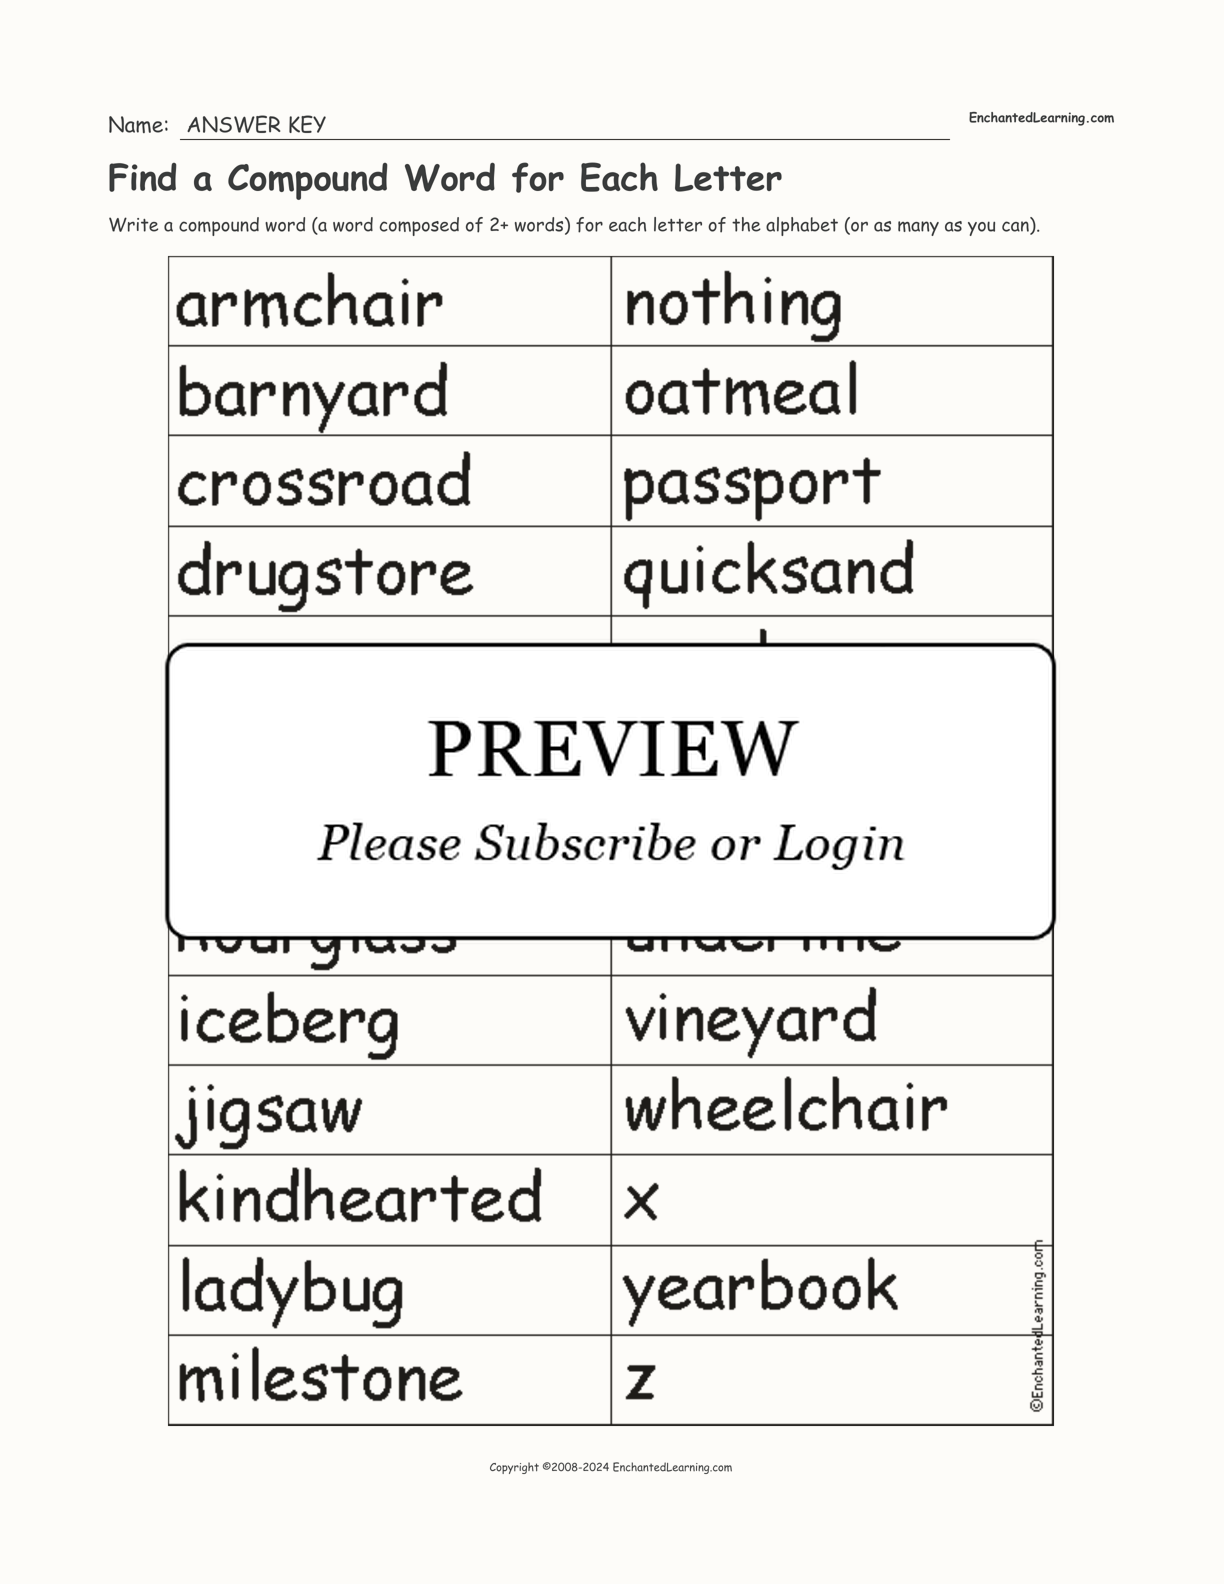 Find a Compound Word for Each Letter interactive worksheet page 2